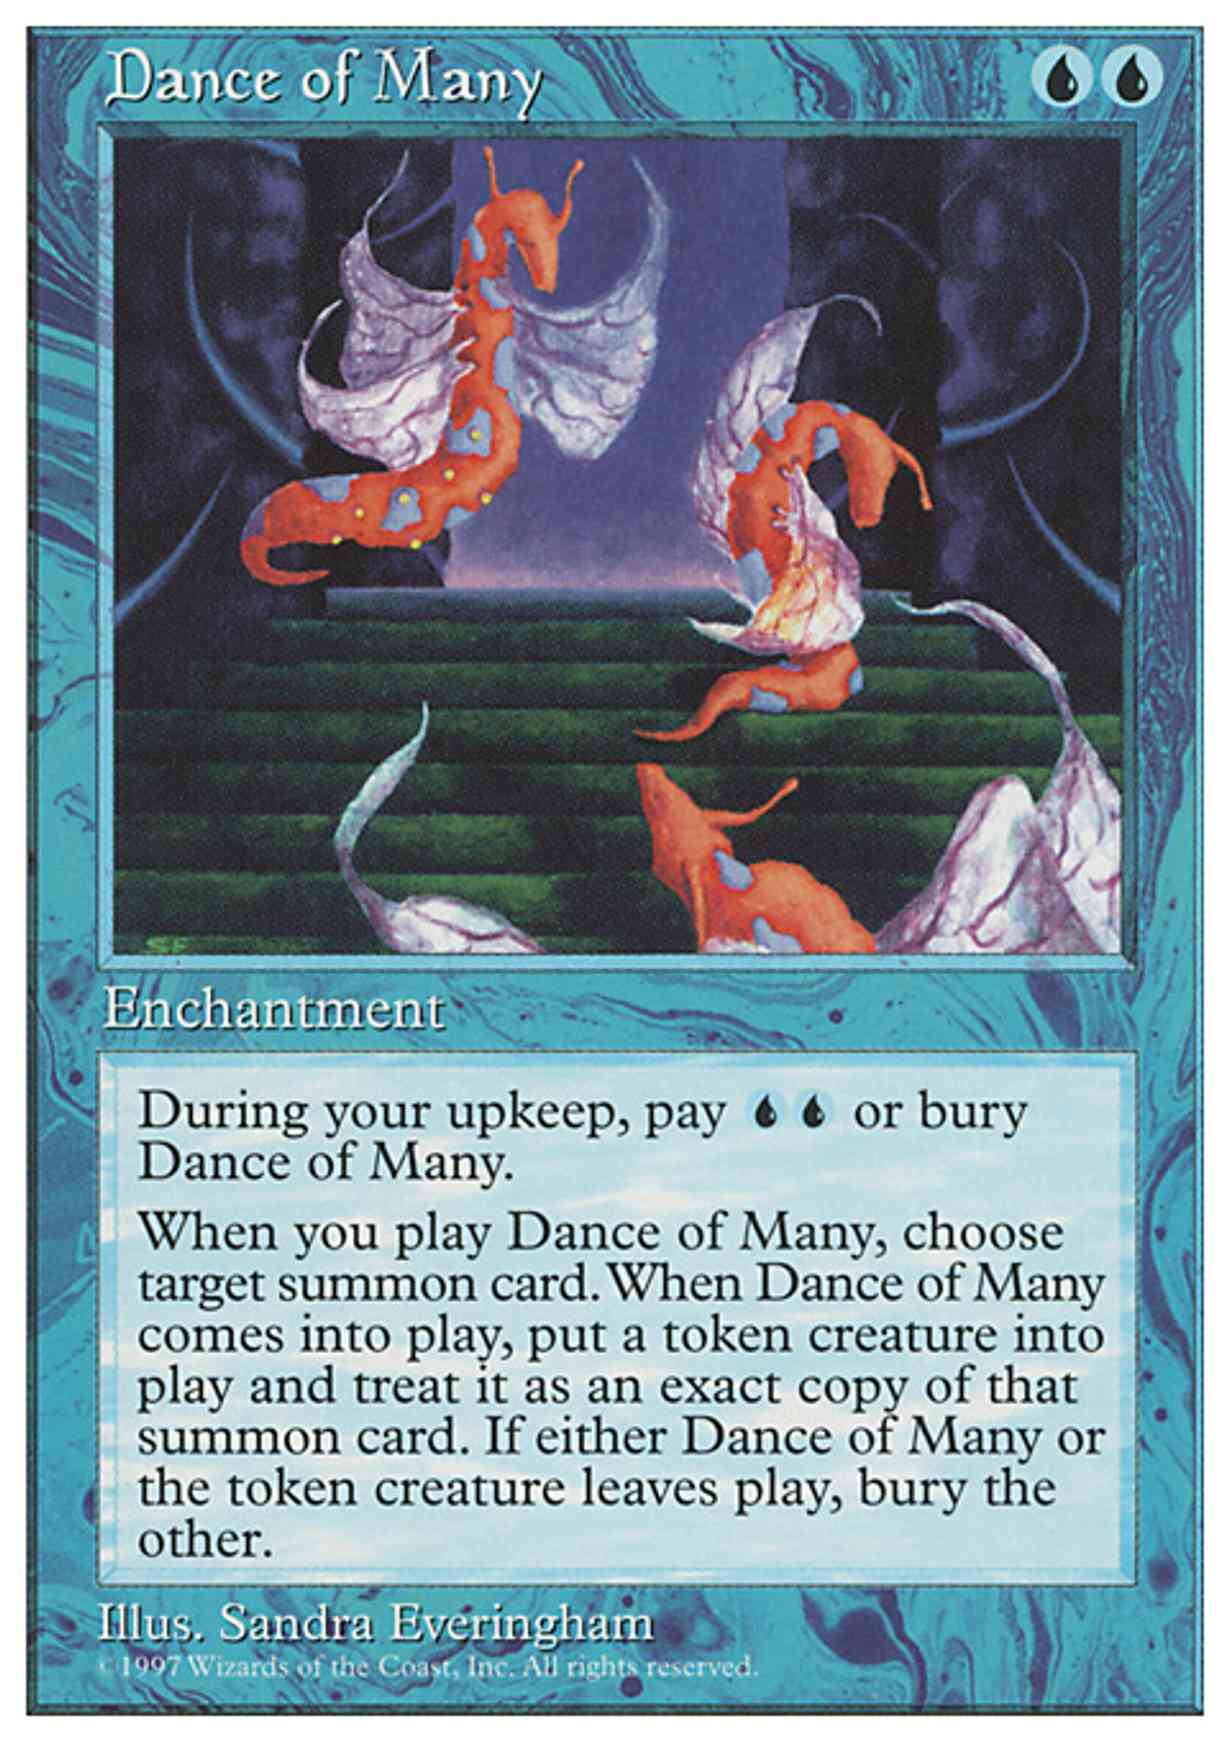 Dance of Many magic card front